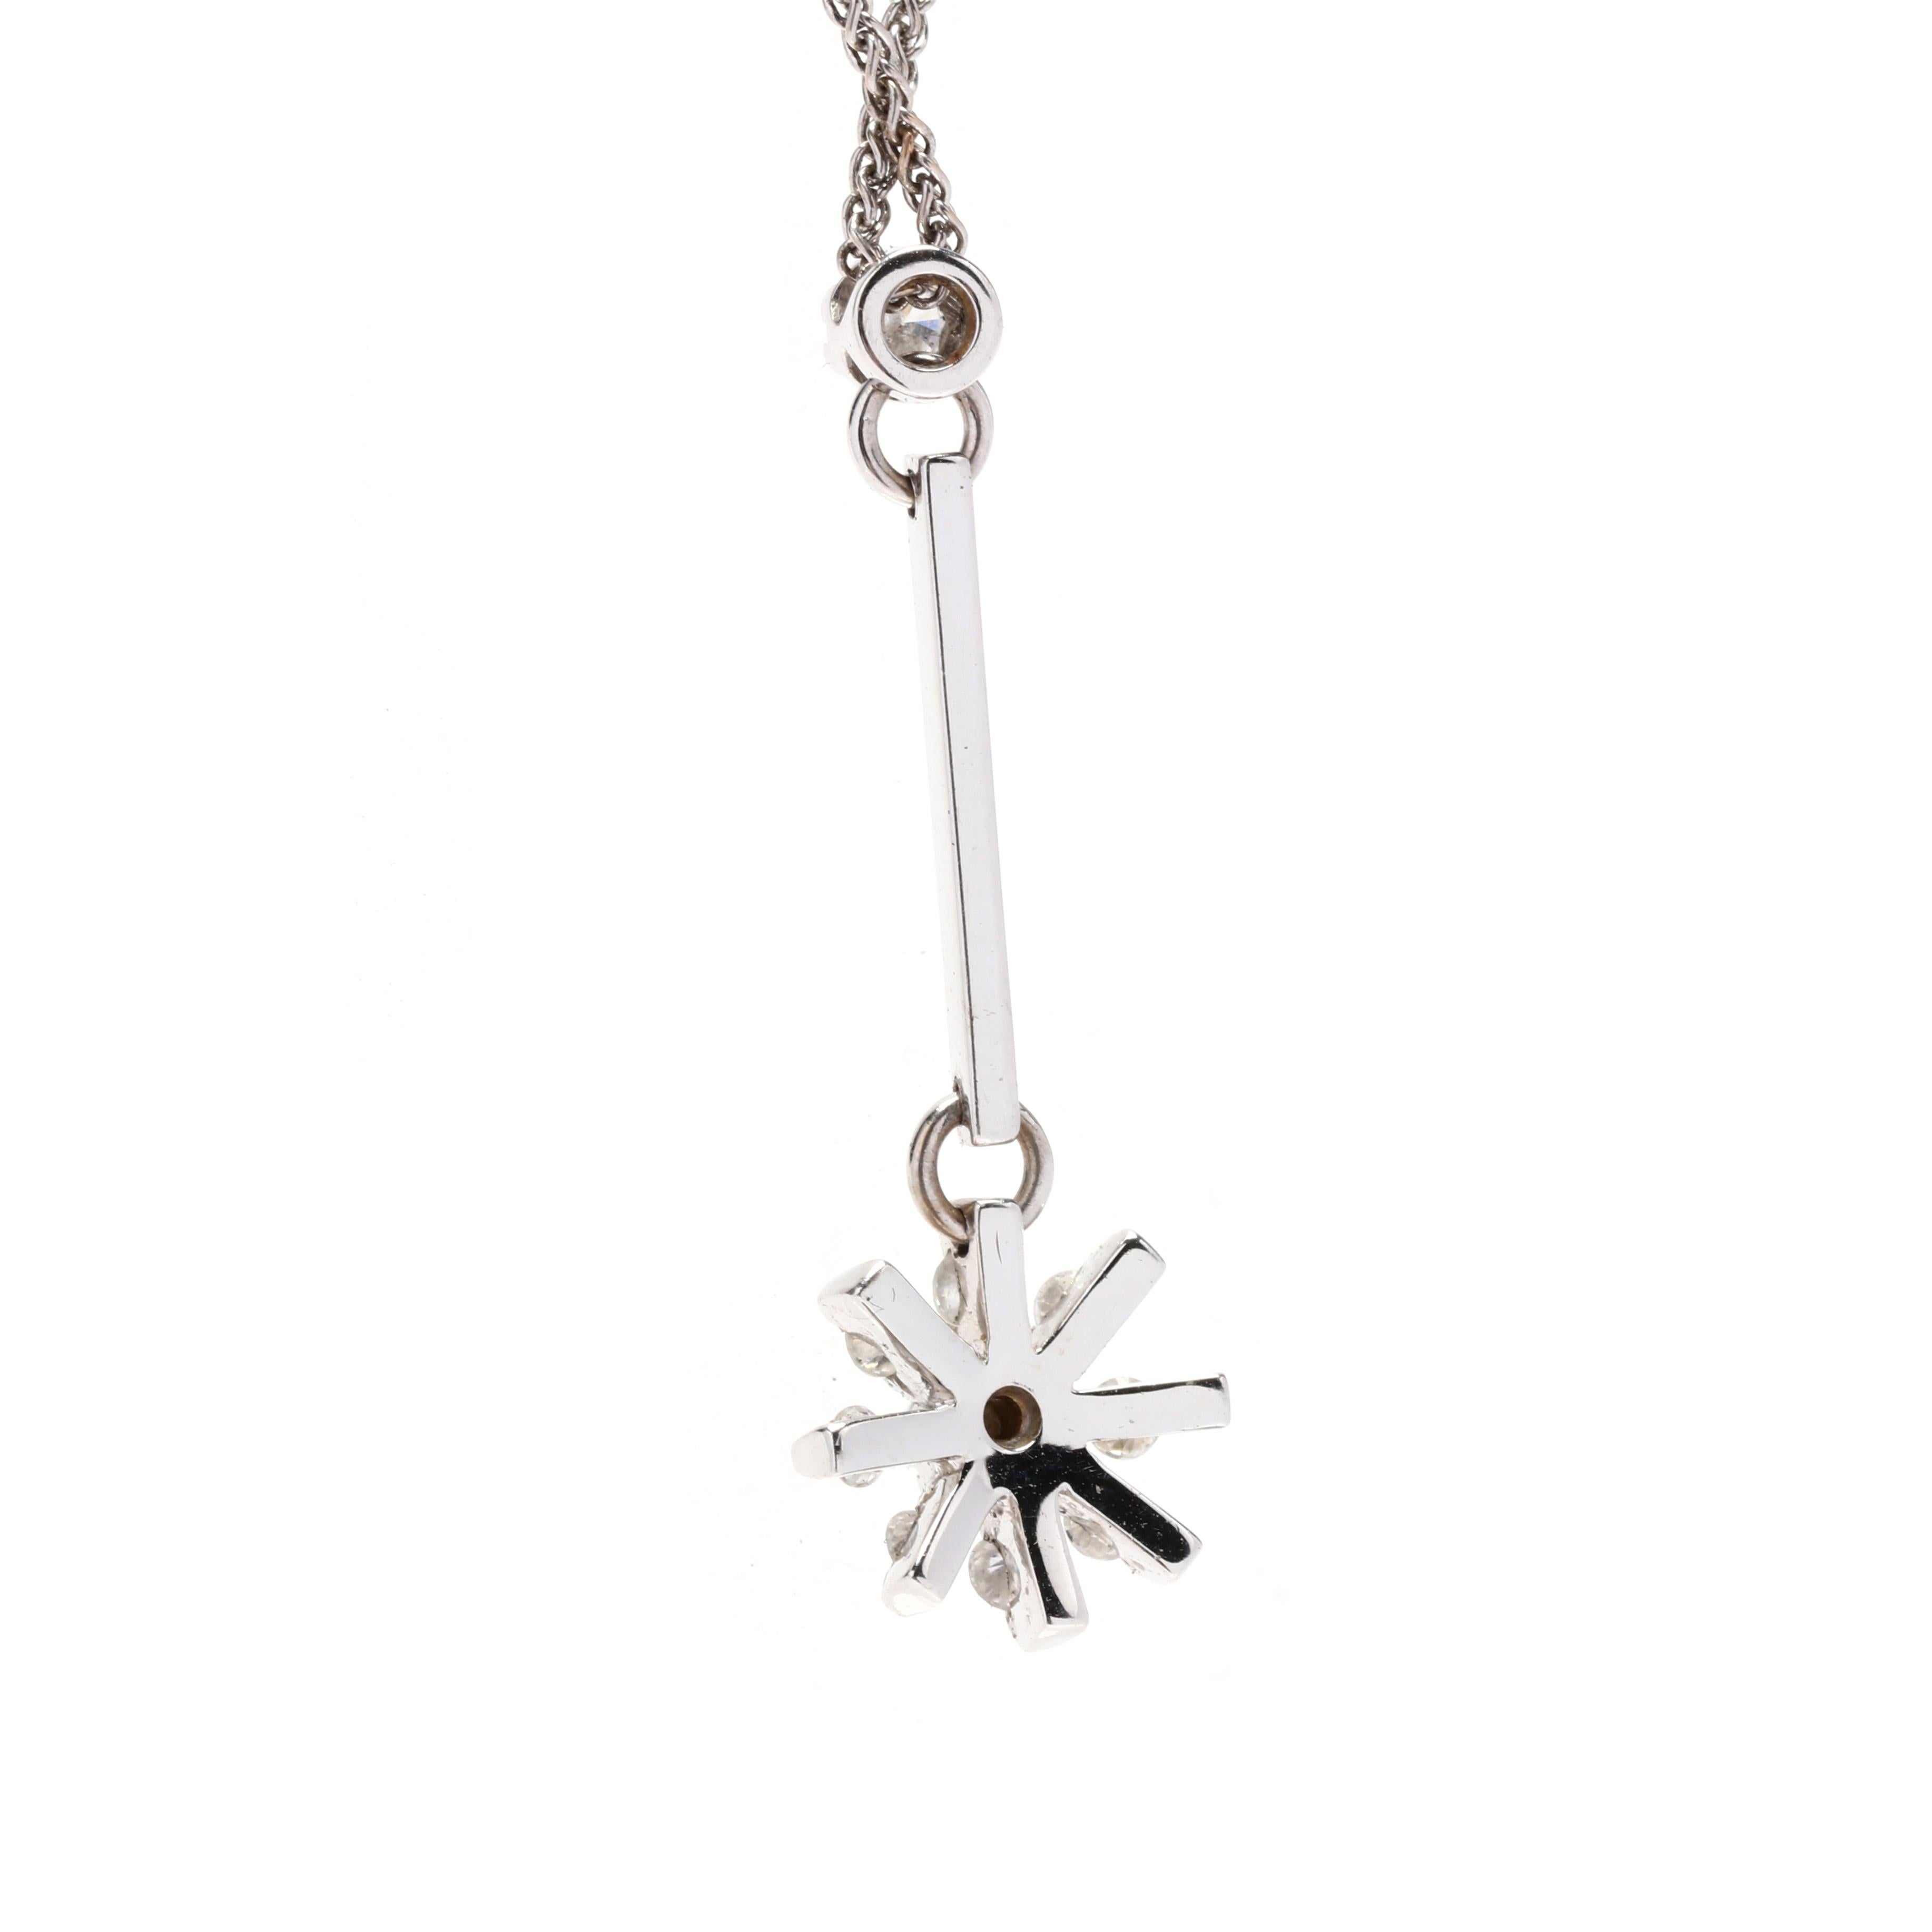 A vintage 14 karat white gold diamond flower necklace, This lariat style necklace features a thin bar drop suspending a simple flower motif set with round brilliant cut diamonds weighing approximately .22 total carats and with a thin wheat chain and